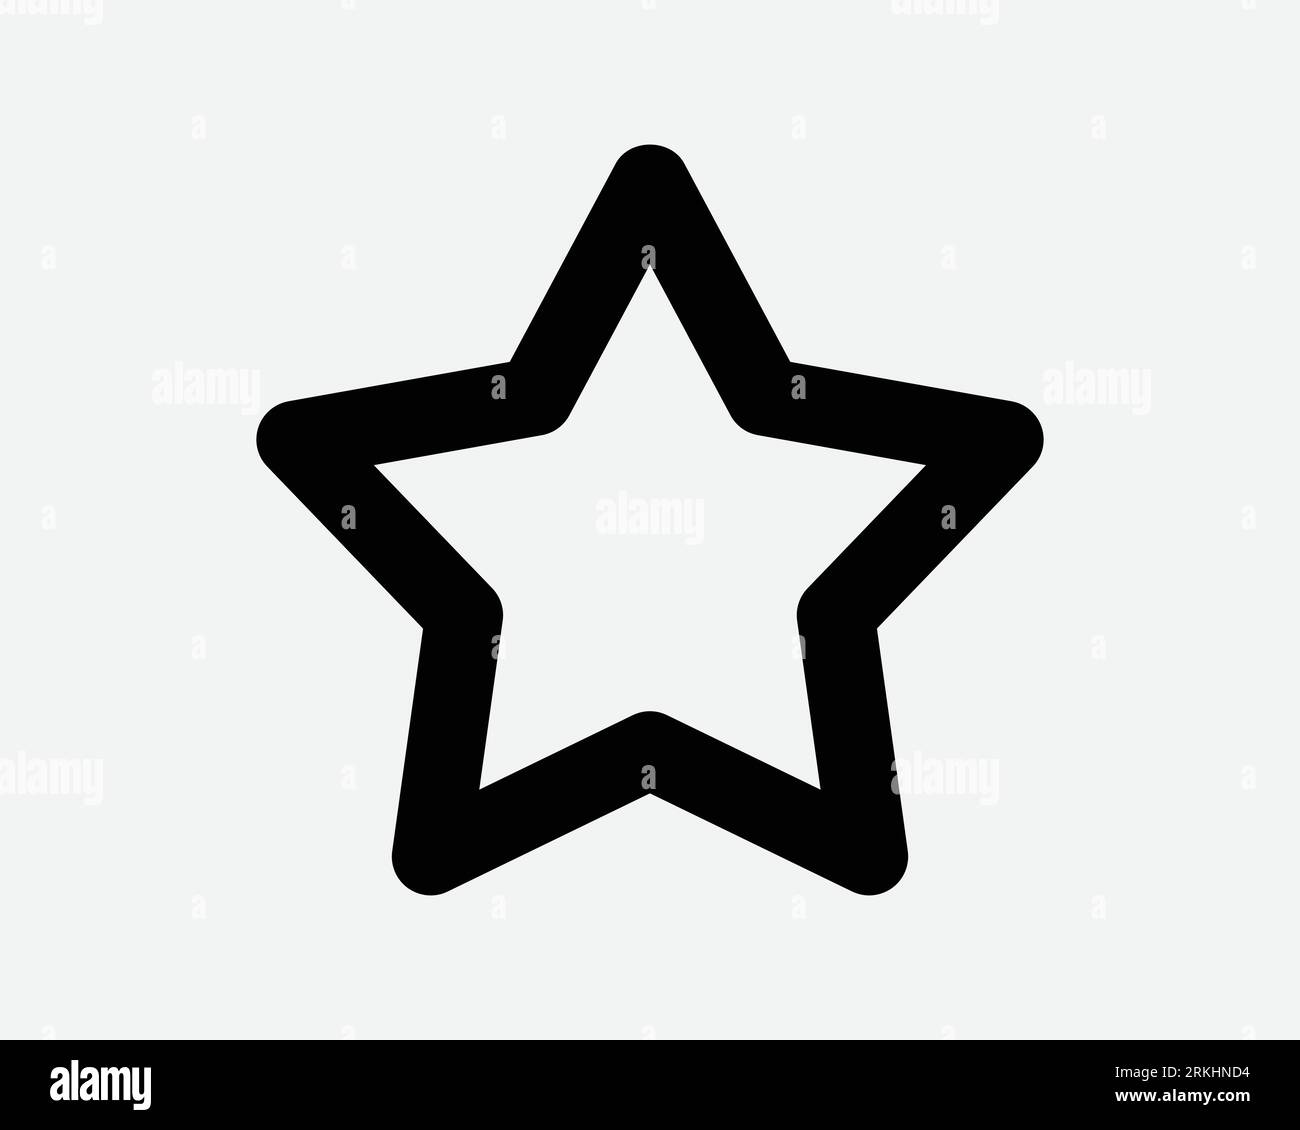 Star Line Icon Favourite Saved Black White Thin Outline Shape Christmas Element Award Sky Style 5 Five Point Button Mark App Web Vector Symbol Sign Stock Vector